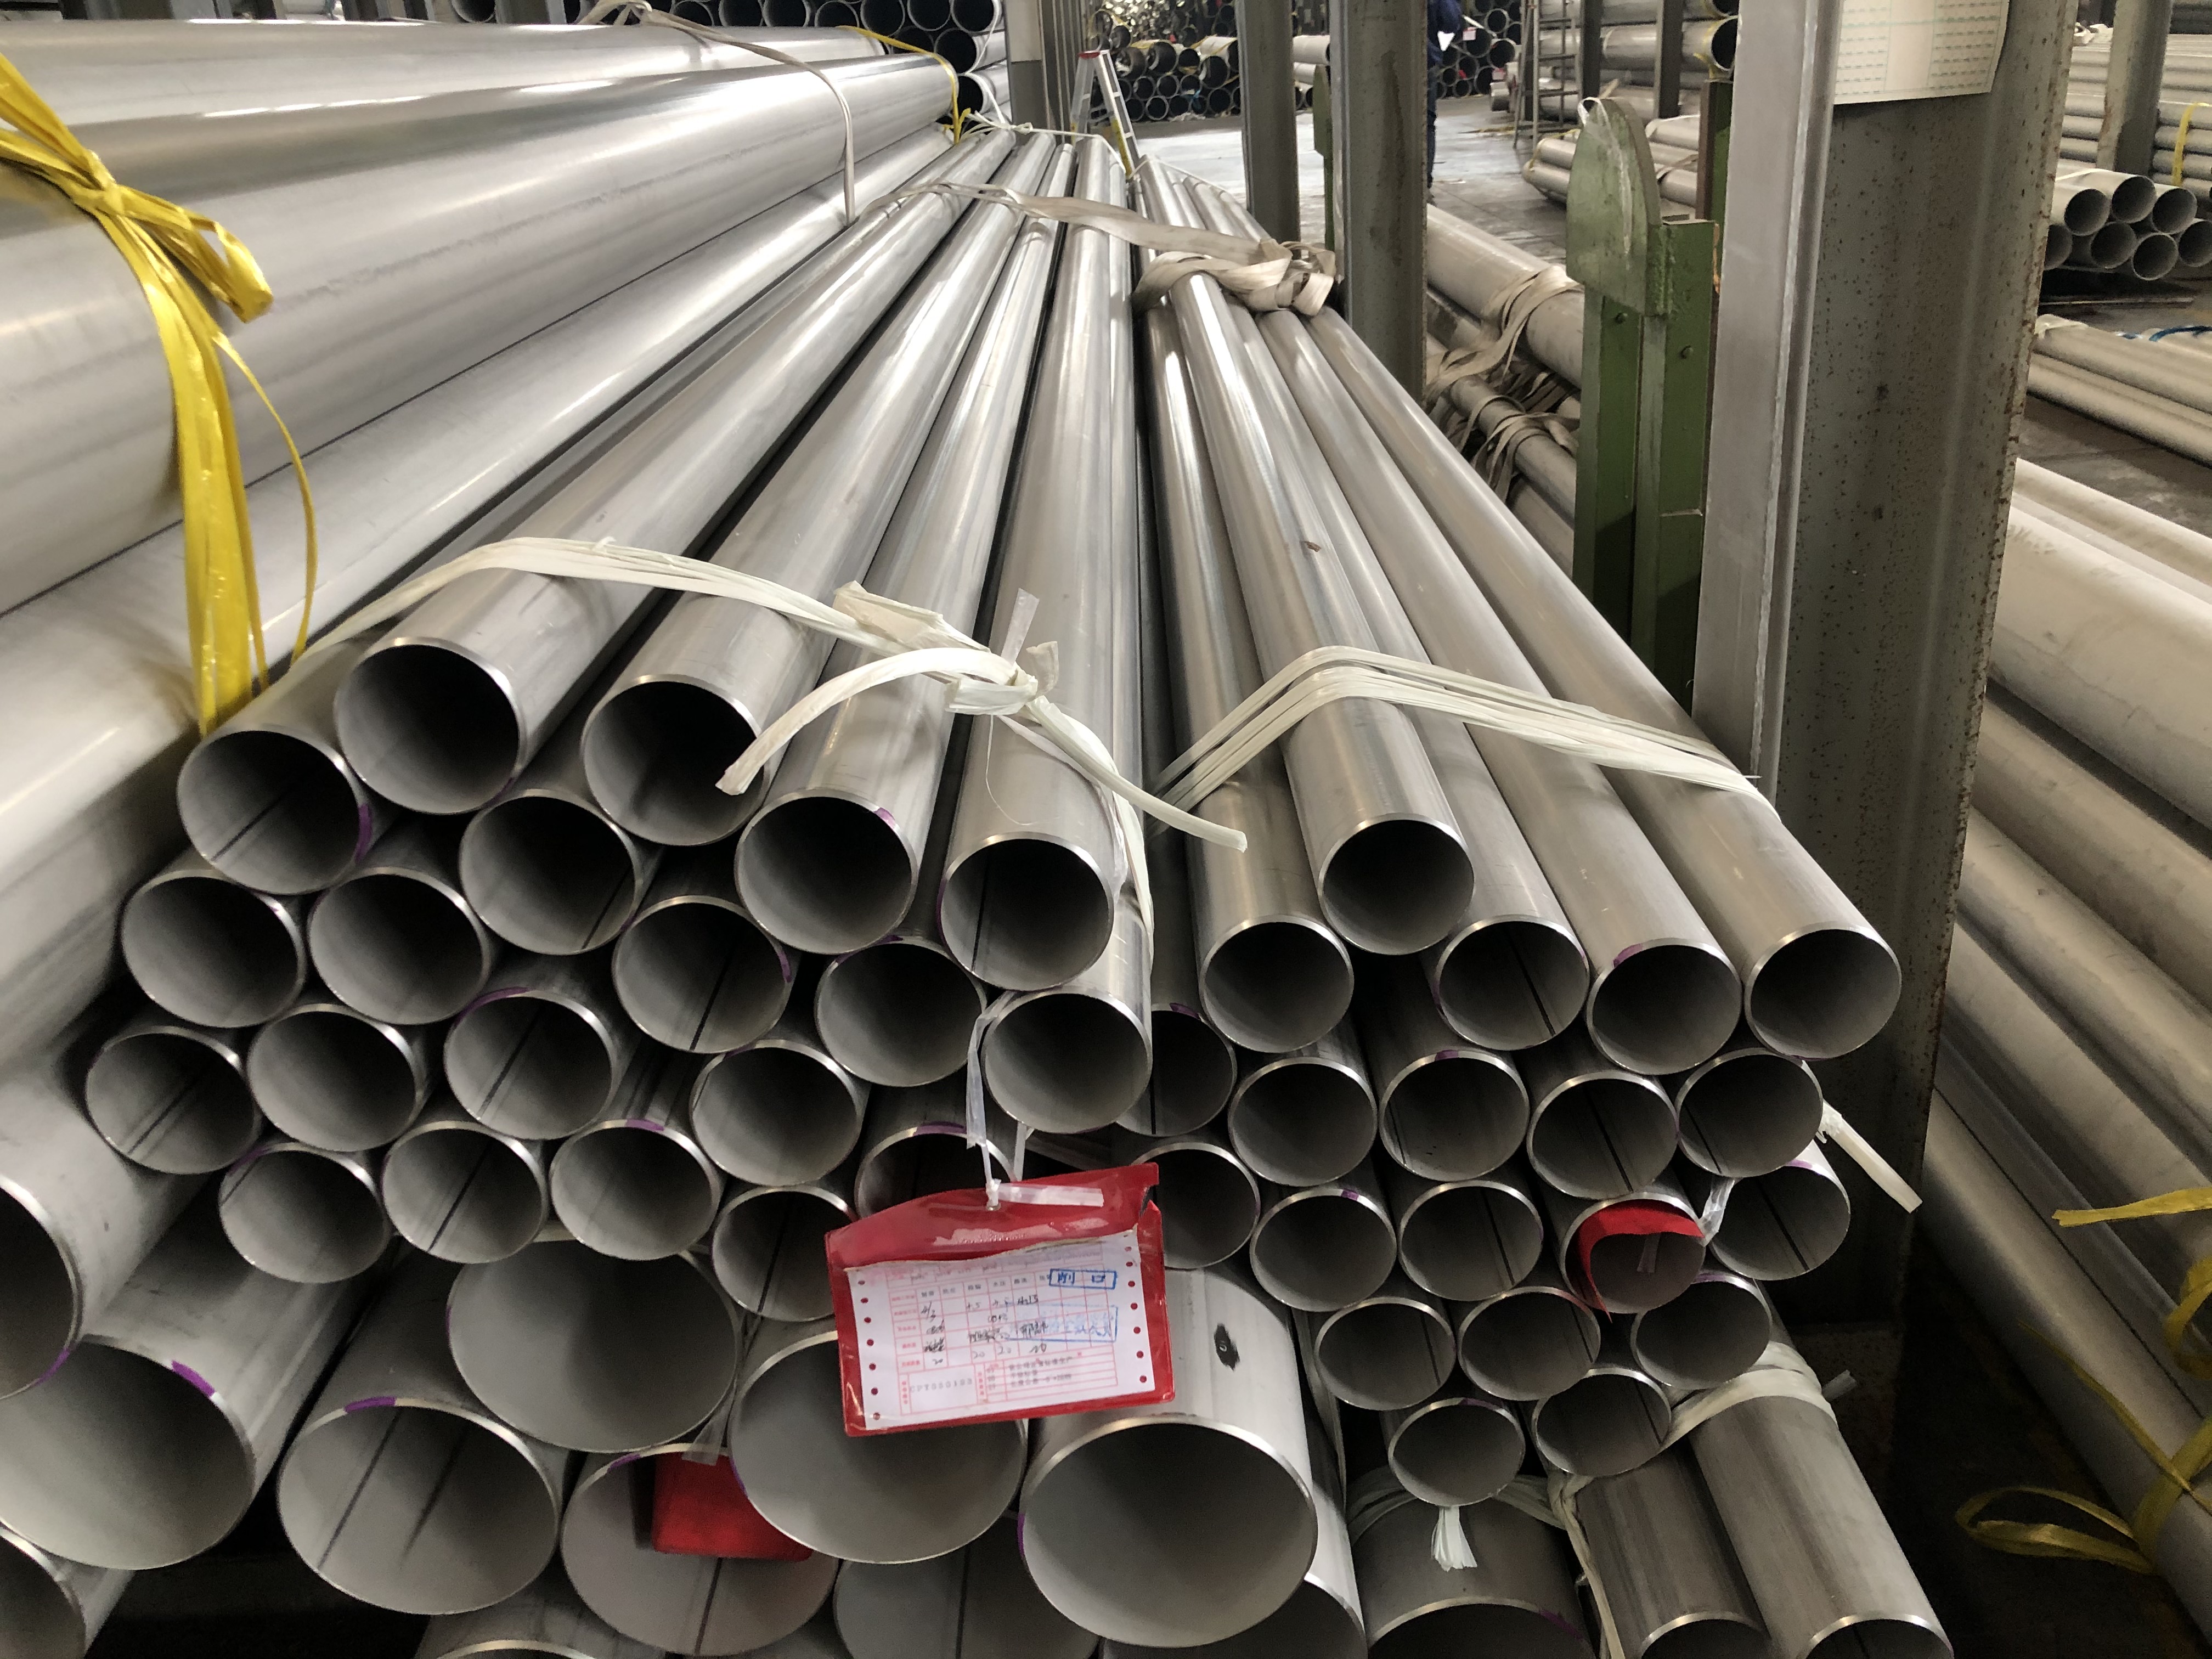 The production process of welded stainless steel pipe